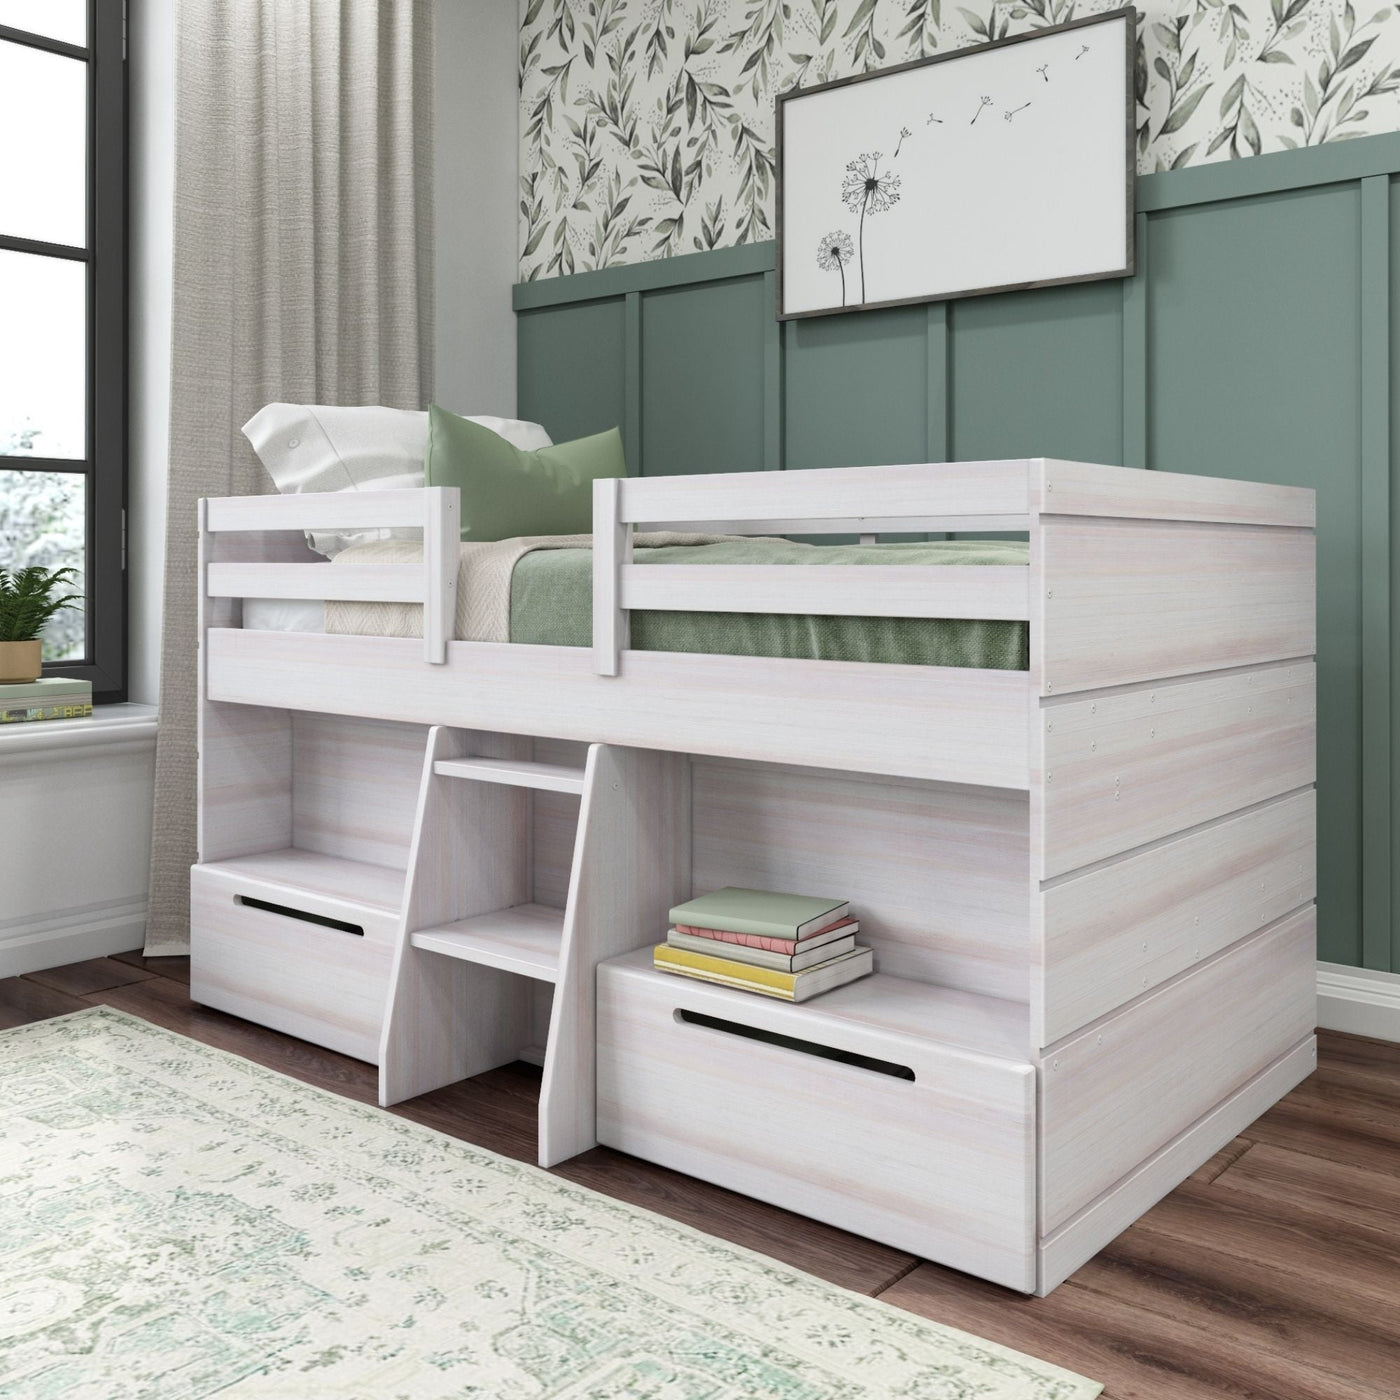 Max & Lily Farmhouse Underbed Storage Drawers, White Wash